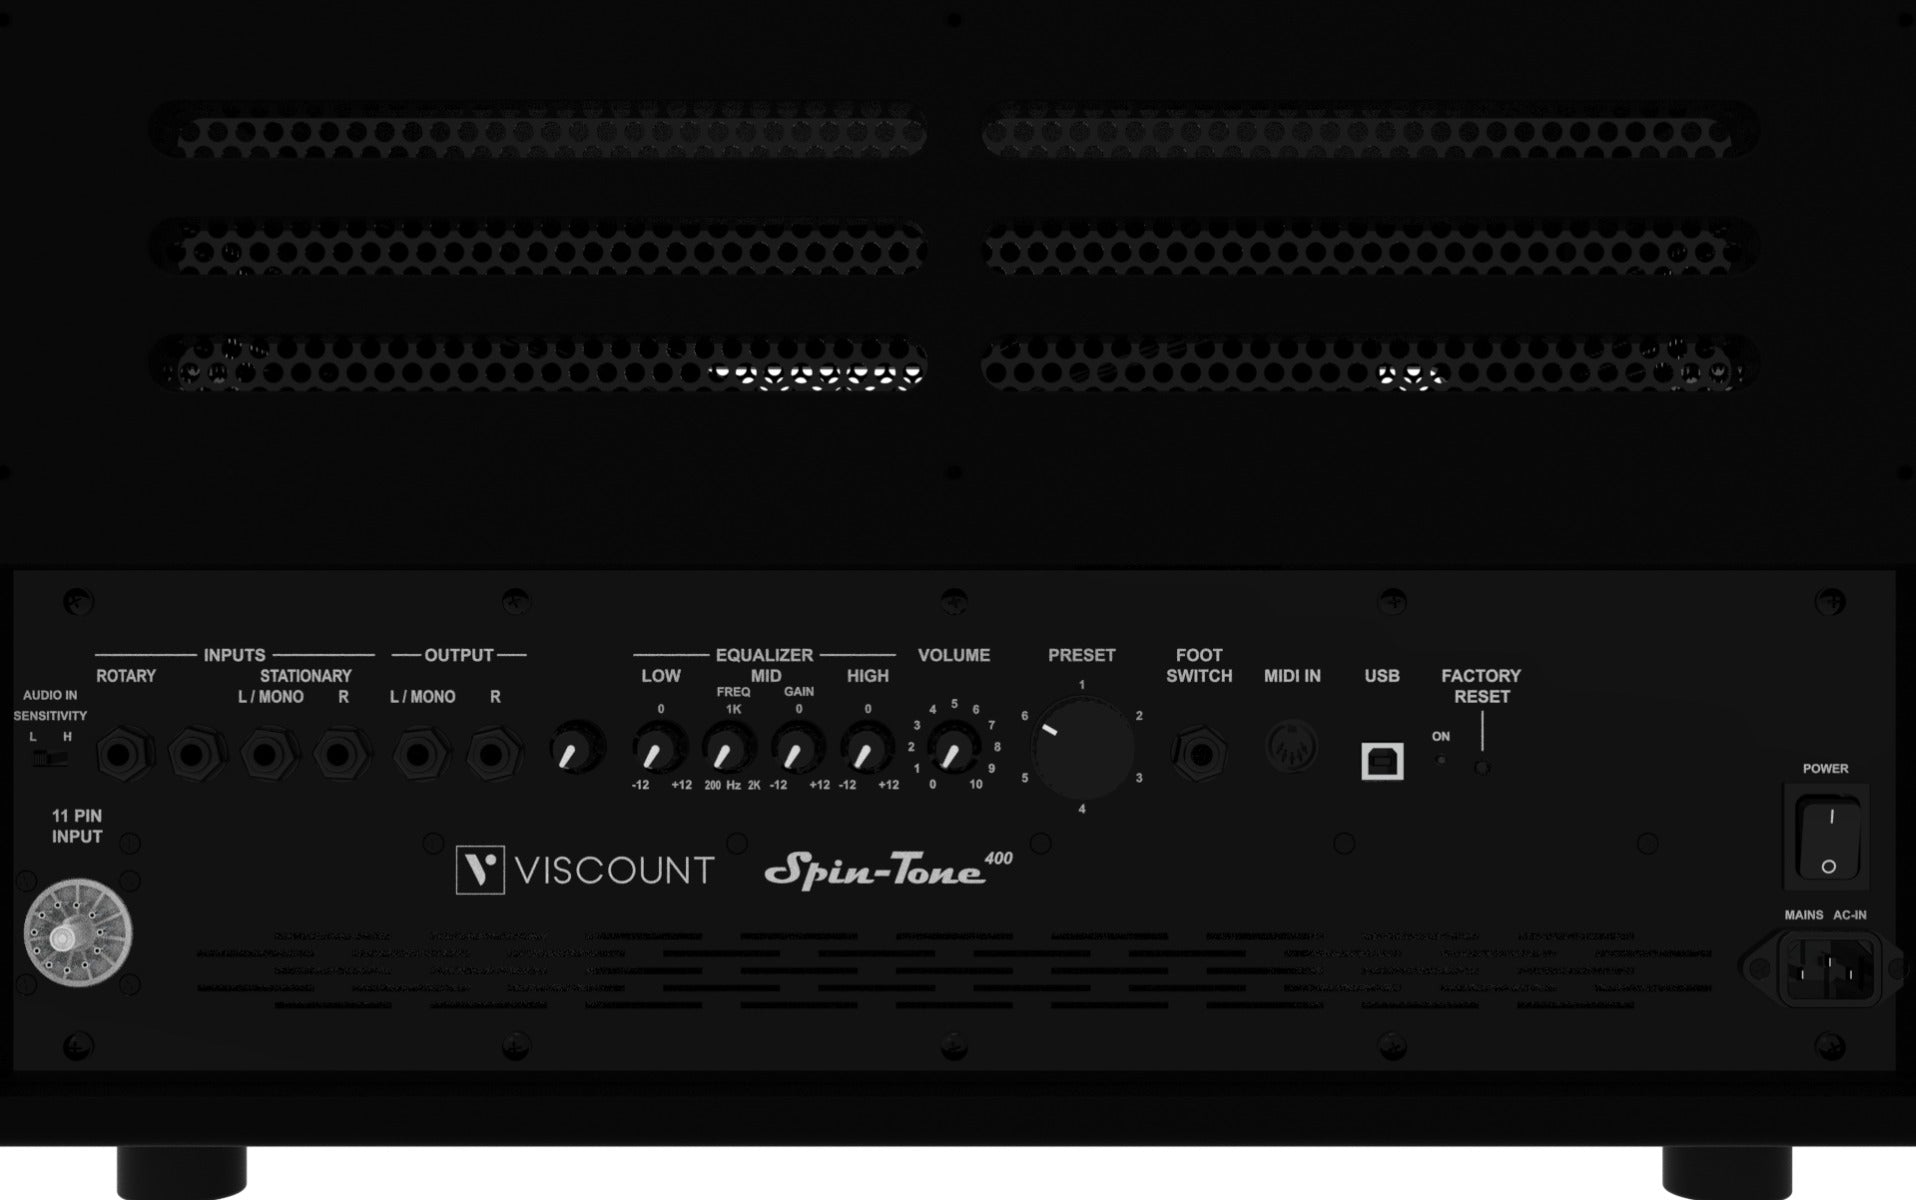 Viscount Legend Spin-Tone 400 Rotary Keyboard Amplifier, View 2